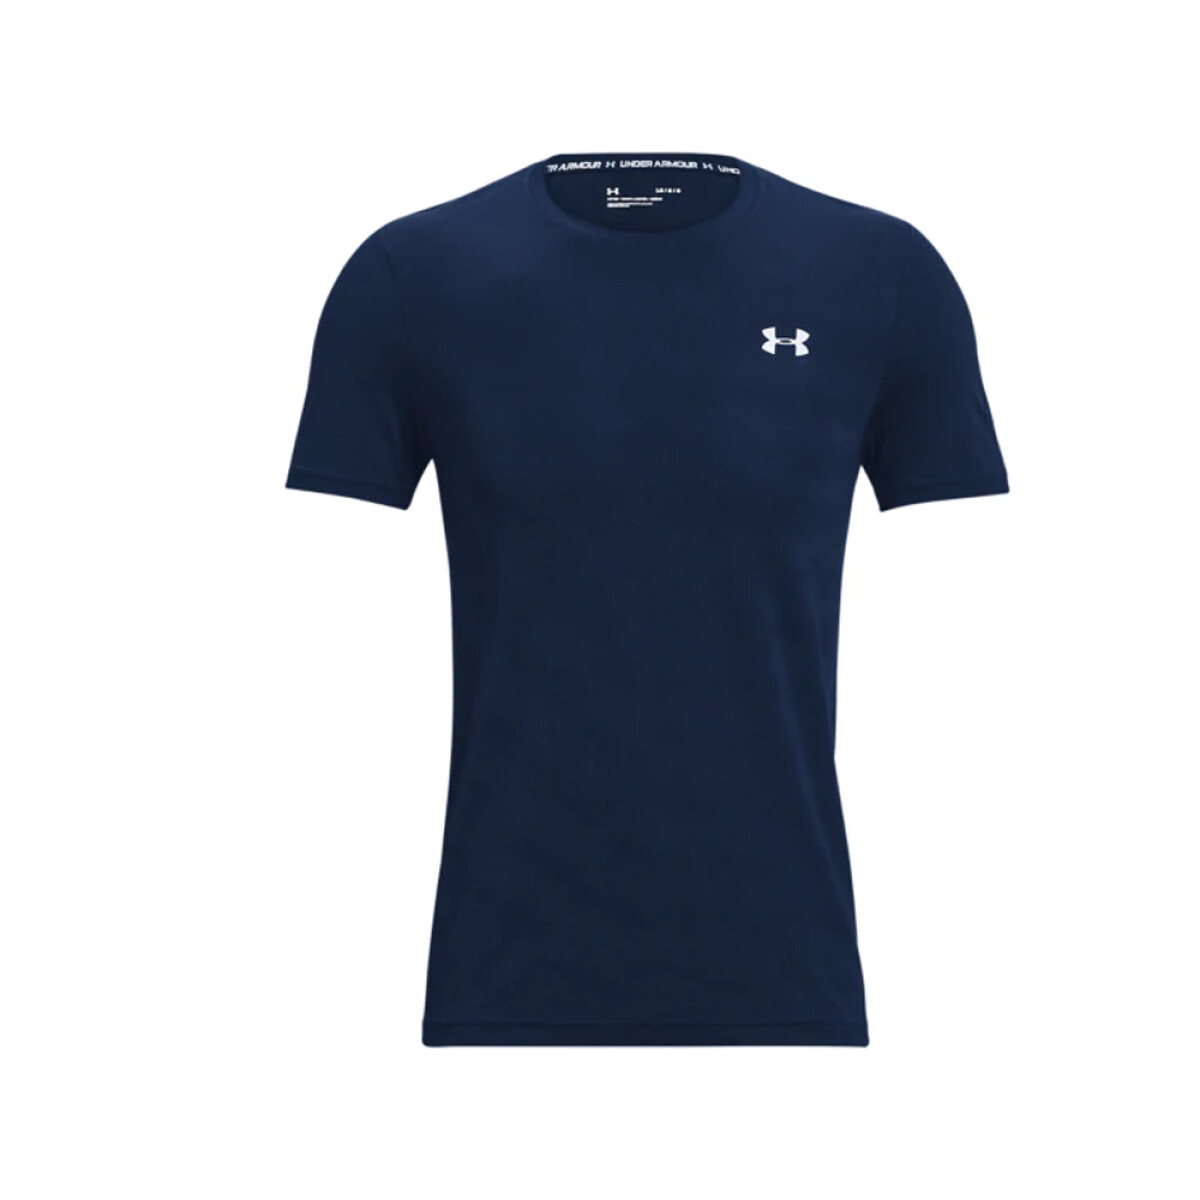 REMERA UNDER ARMOUR SEAMLESS RADIAL - Blue 